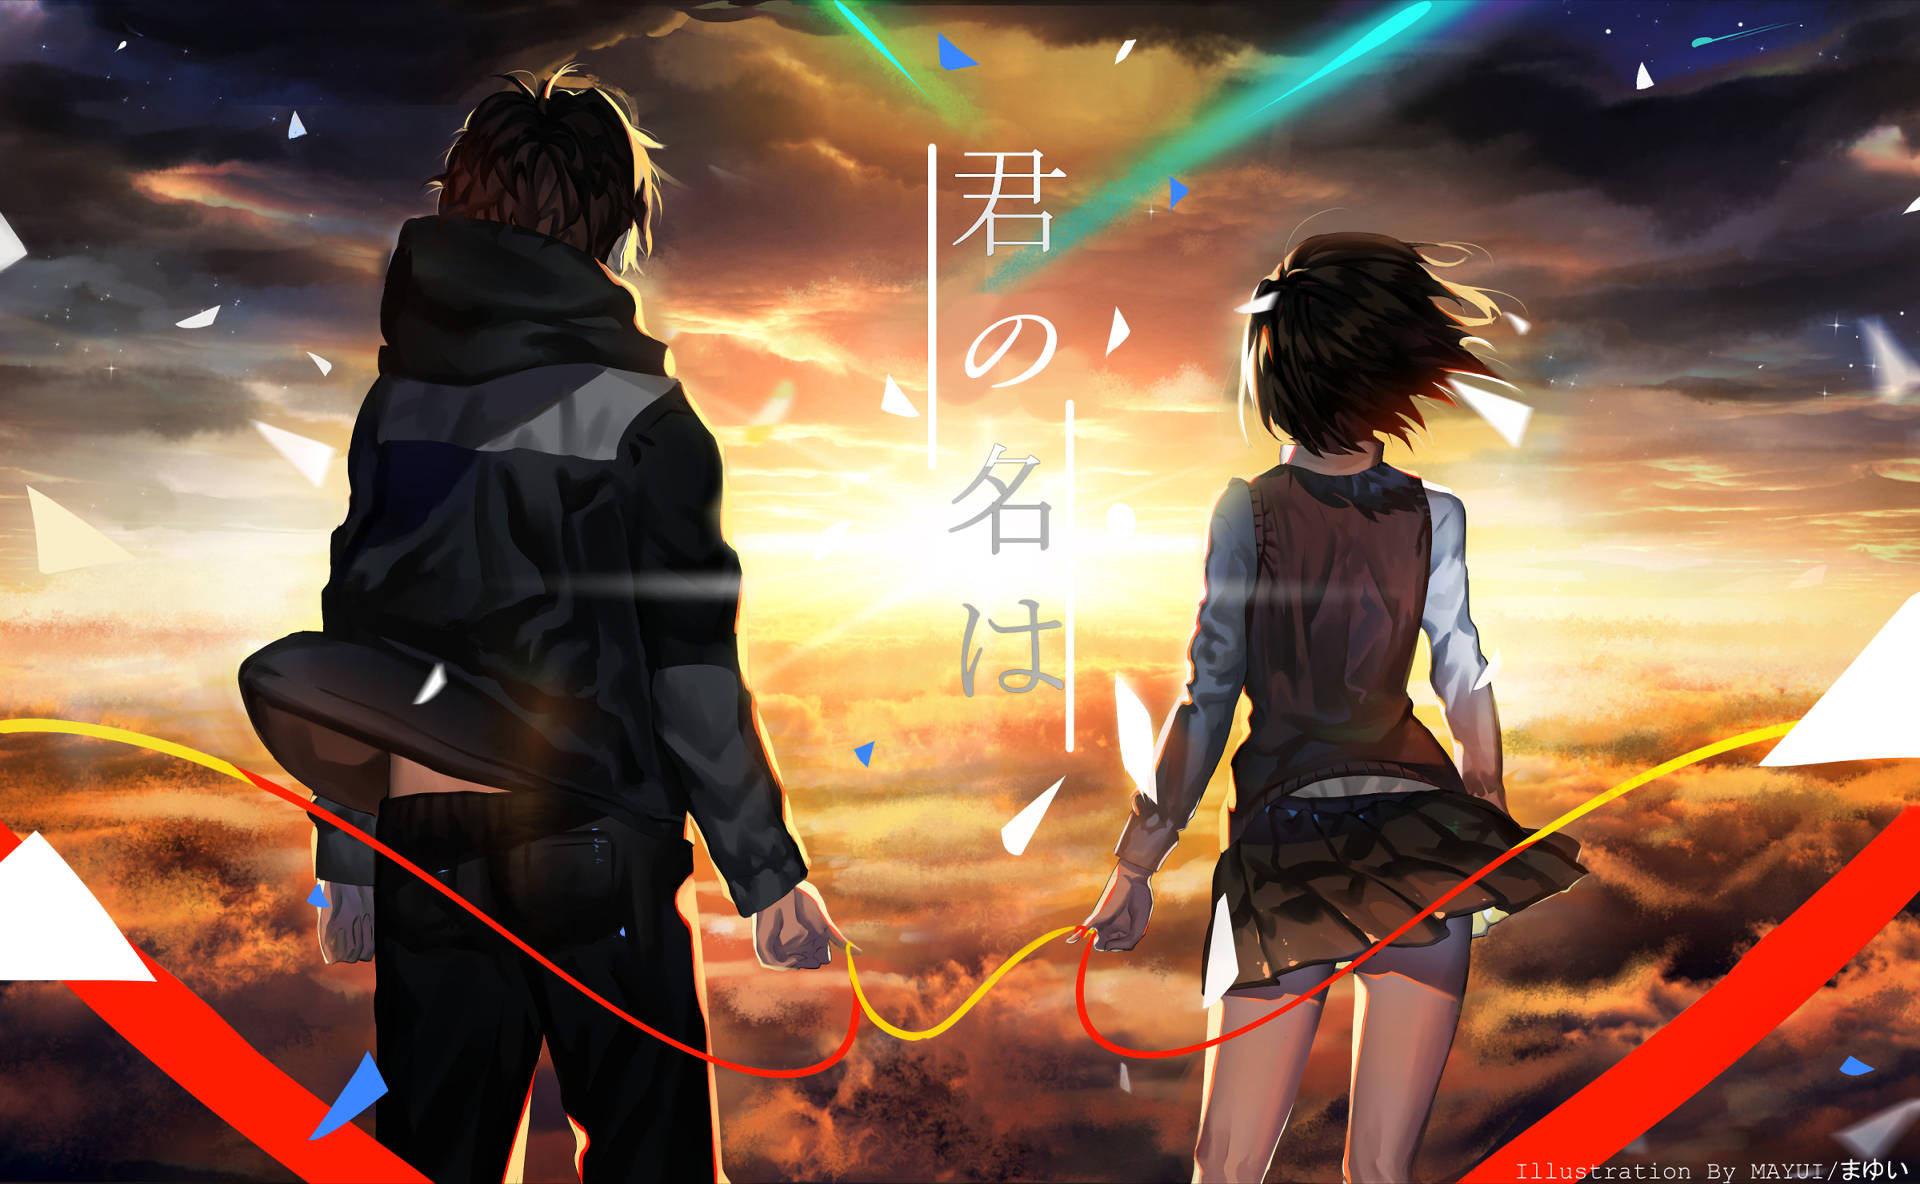 Your Name Anime 2016 Lovers In Sunset